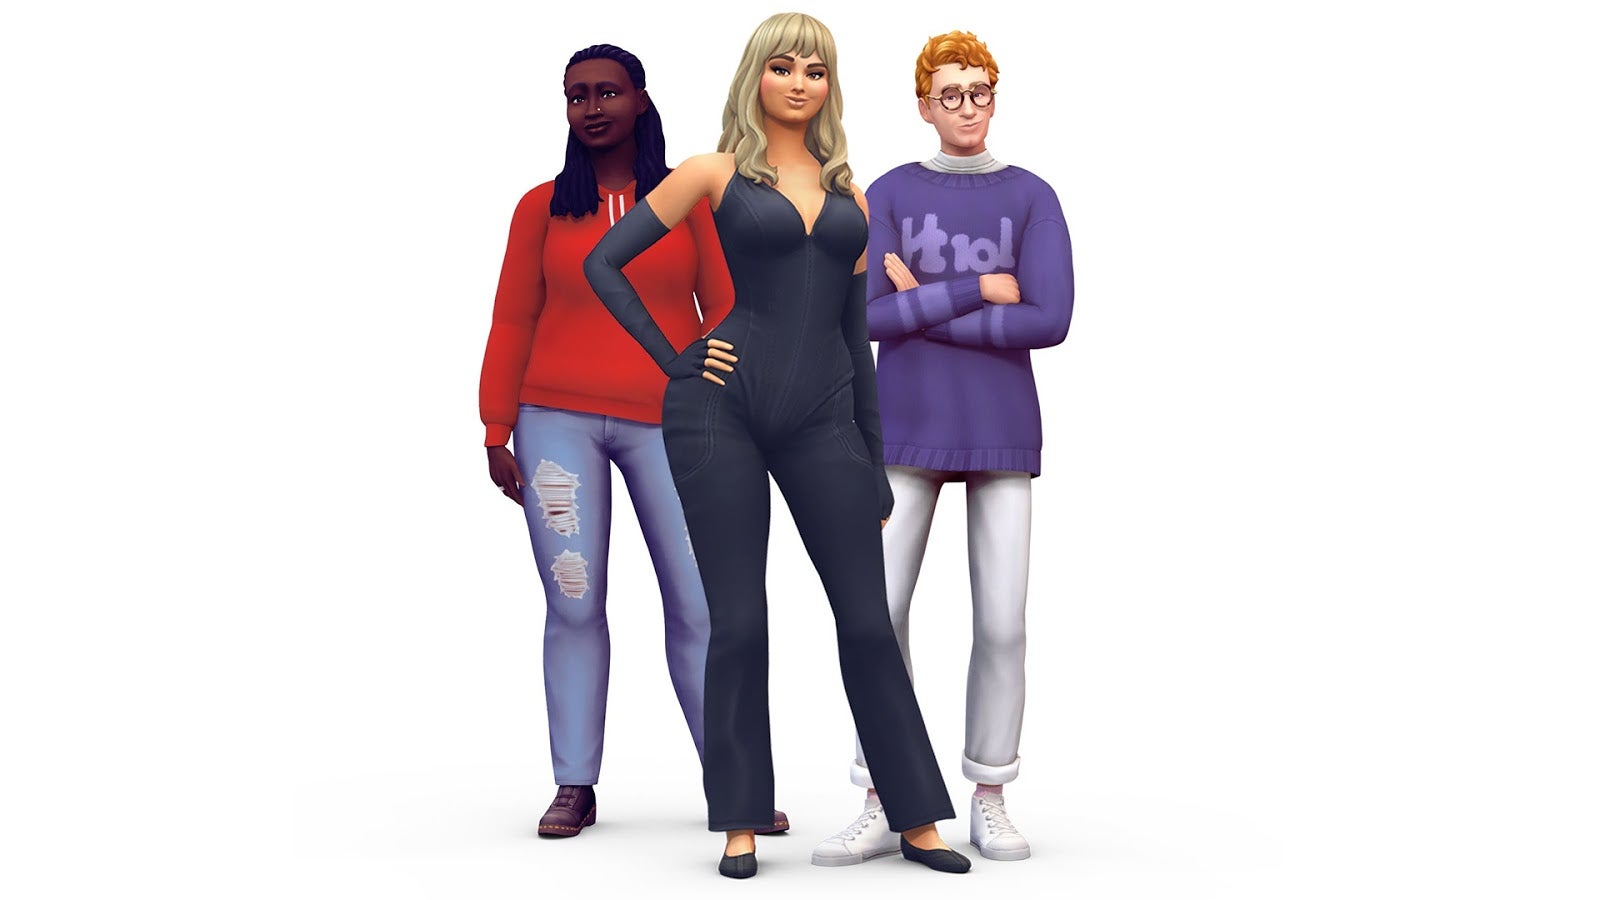 From left to right: Joy Oladokun, Bebe Rexha, and Glass Animals' Dave Bayley (in Sim form, of course). (Image: EA)